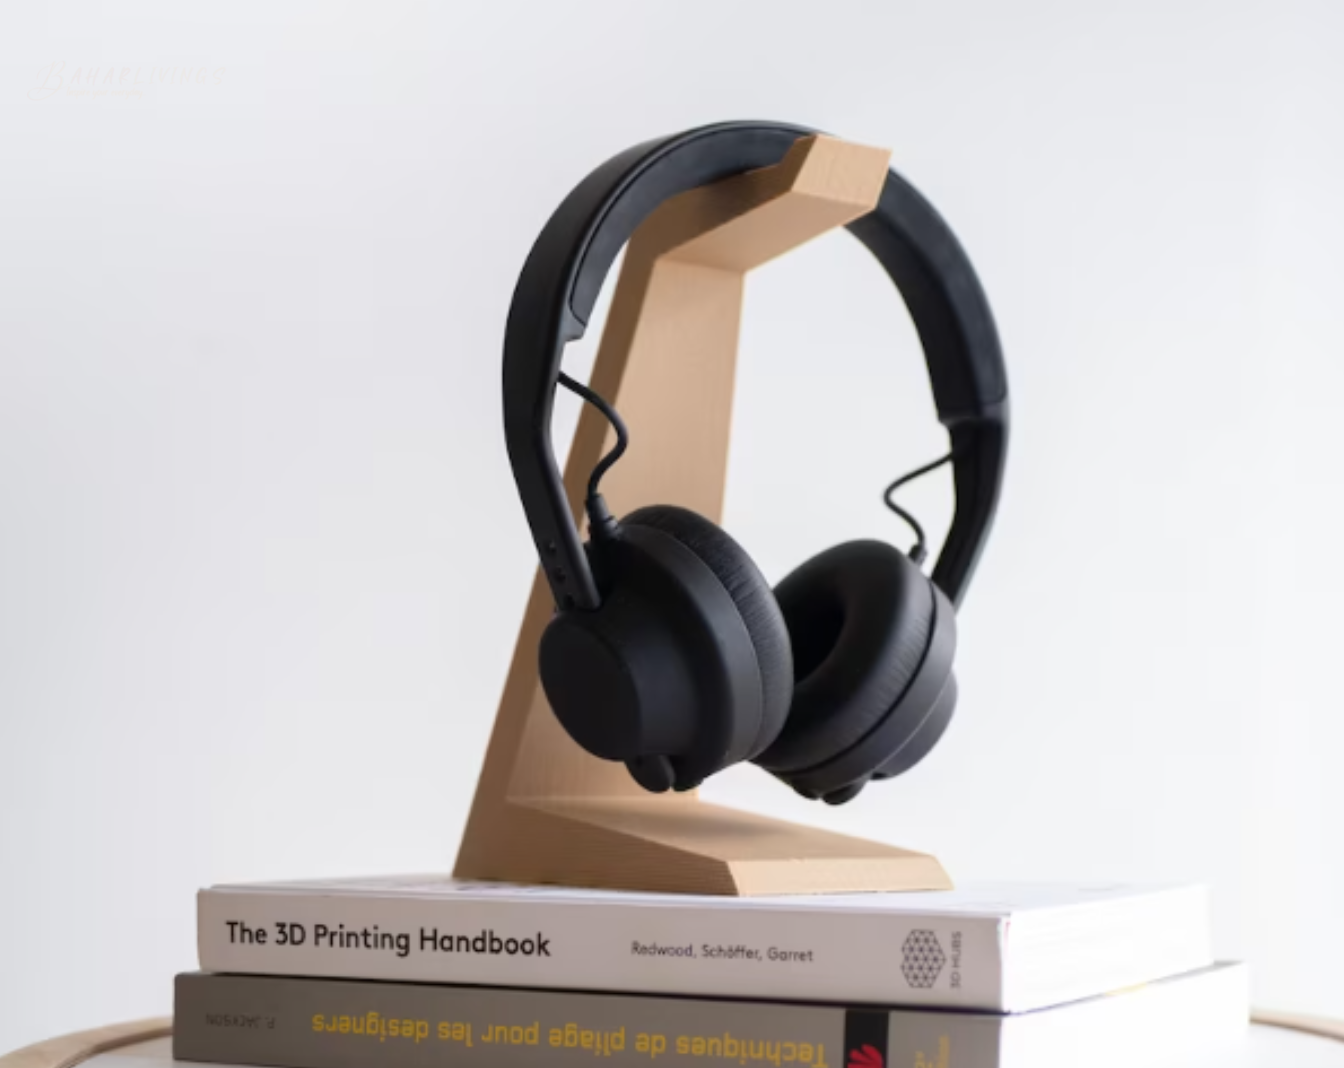 Useful gift idea for teens: Stylish wooden holder for headphones, ideal for keeping their desk organized.